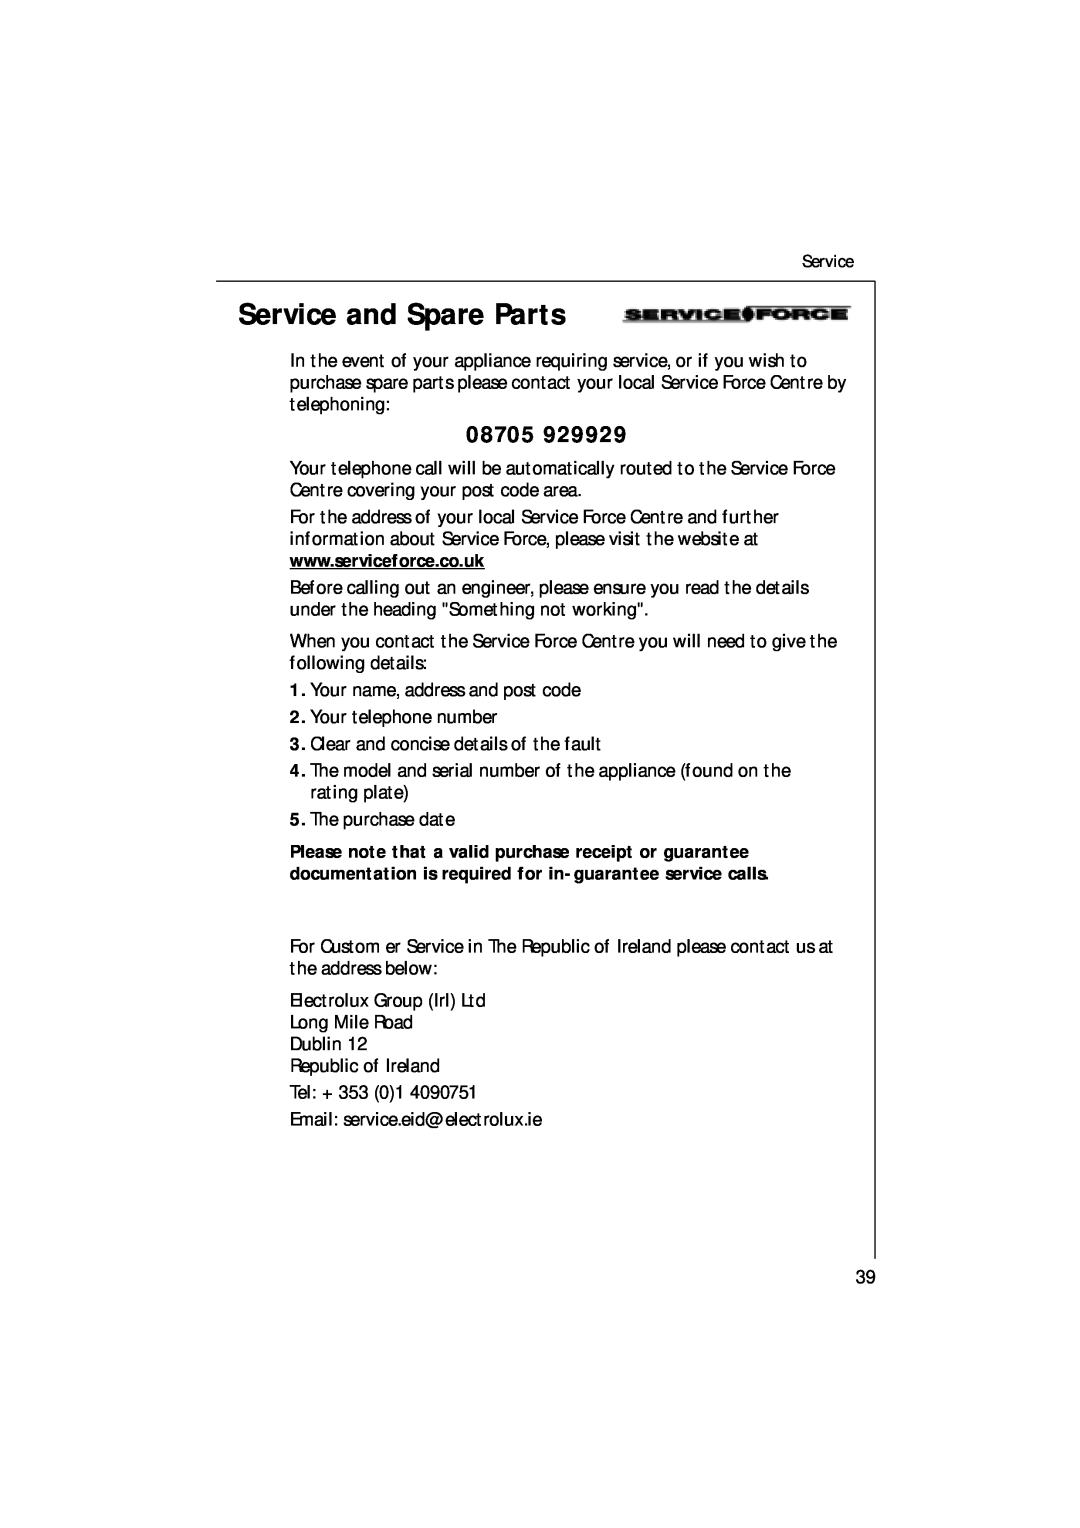 Electrolux 85480 VI manual Service and Spare Parts, 08705 